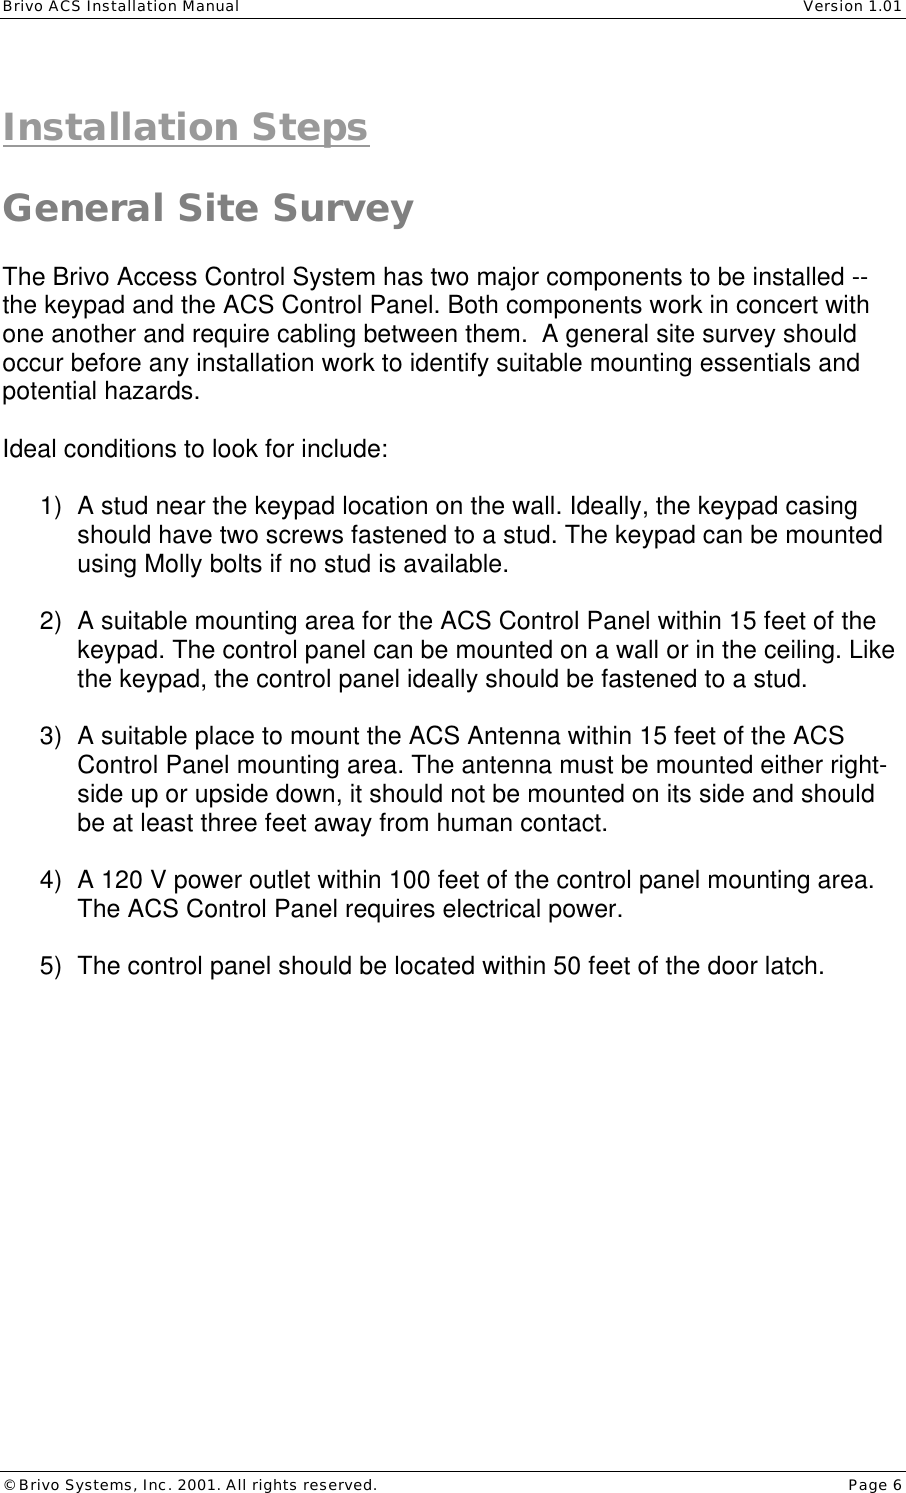 Brivo ACS Installation Manual    Version 1.01 © Brivo Systems, Inc. 2001. All rights reserved.    Page 6  Installation Steps  General Site Survey  The Brivo Access Control System has two major components to be installed -- the keypad and the ACS Control Panel. Both components work in concert with one another and require cabling between them.  A general site survey should occur before any installation work to identify suitable mounting essentials and potential hazards.  Ideal conditions to look for include:  1) A stud near the keypad location on the wall. Ideally, the keypad casing should have two screws fastened to a stud. The keypad can be mounted using Molly bolts if no stud is available.  2) A suitable mounting area for the ACS Control Panel within 15 feet of the keypad. The control panel can be mounted on a wall or in the ceiling. Like the keypad, the control panel ideally should be fastened to a stud.  3) A suitable place to mount the ACS Antenna within 15 feet of the ACS Control Panel mounting area. The antenna must be mounted either right-side up or upside down, it should not be mounted on its side and should be at least three feet away from human contact.   4) A 120 V power outlet within 100 feet of the control panel mounting area. The ACS Control Panel requires electrical power.  5) The control panel should be located within 50 feet of the door latch. 